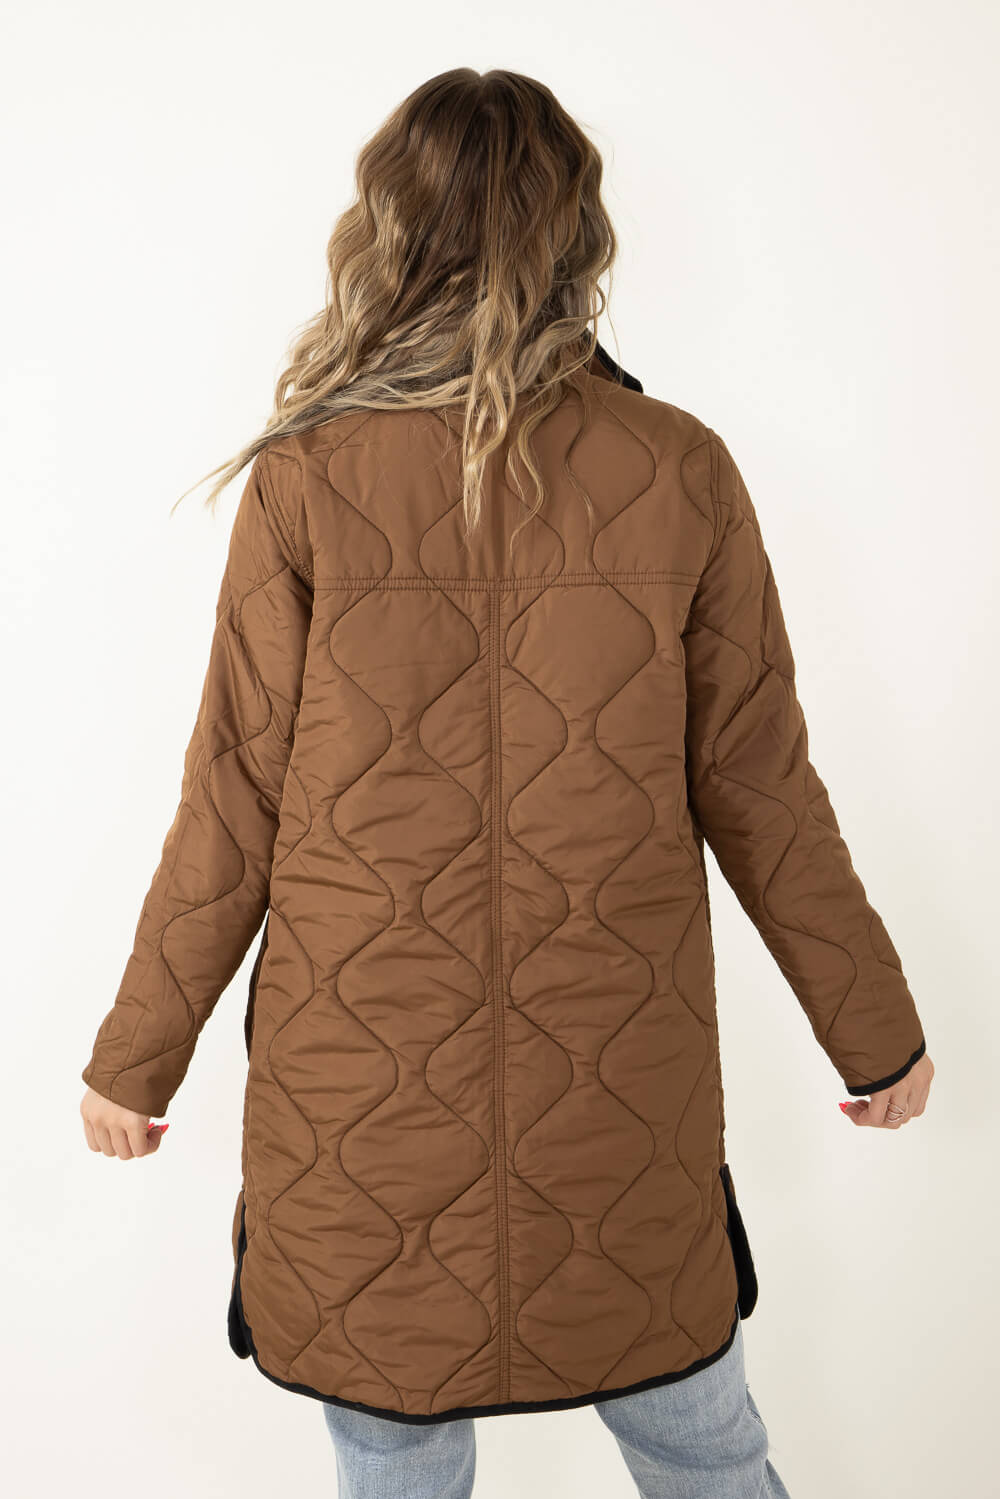 Thread & Supply Reversible Nixie Jacket for Women in Black/Brown